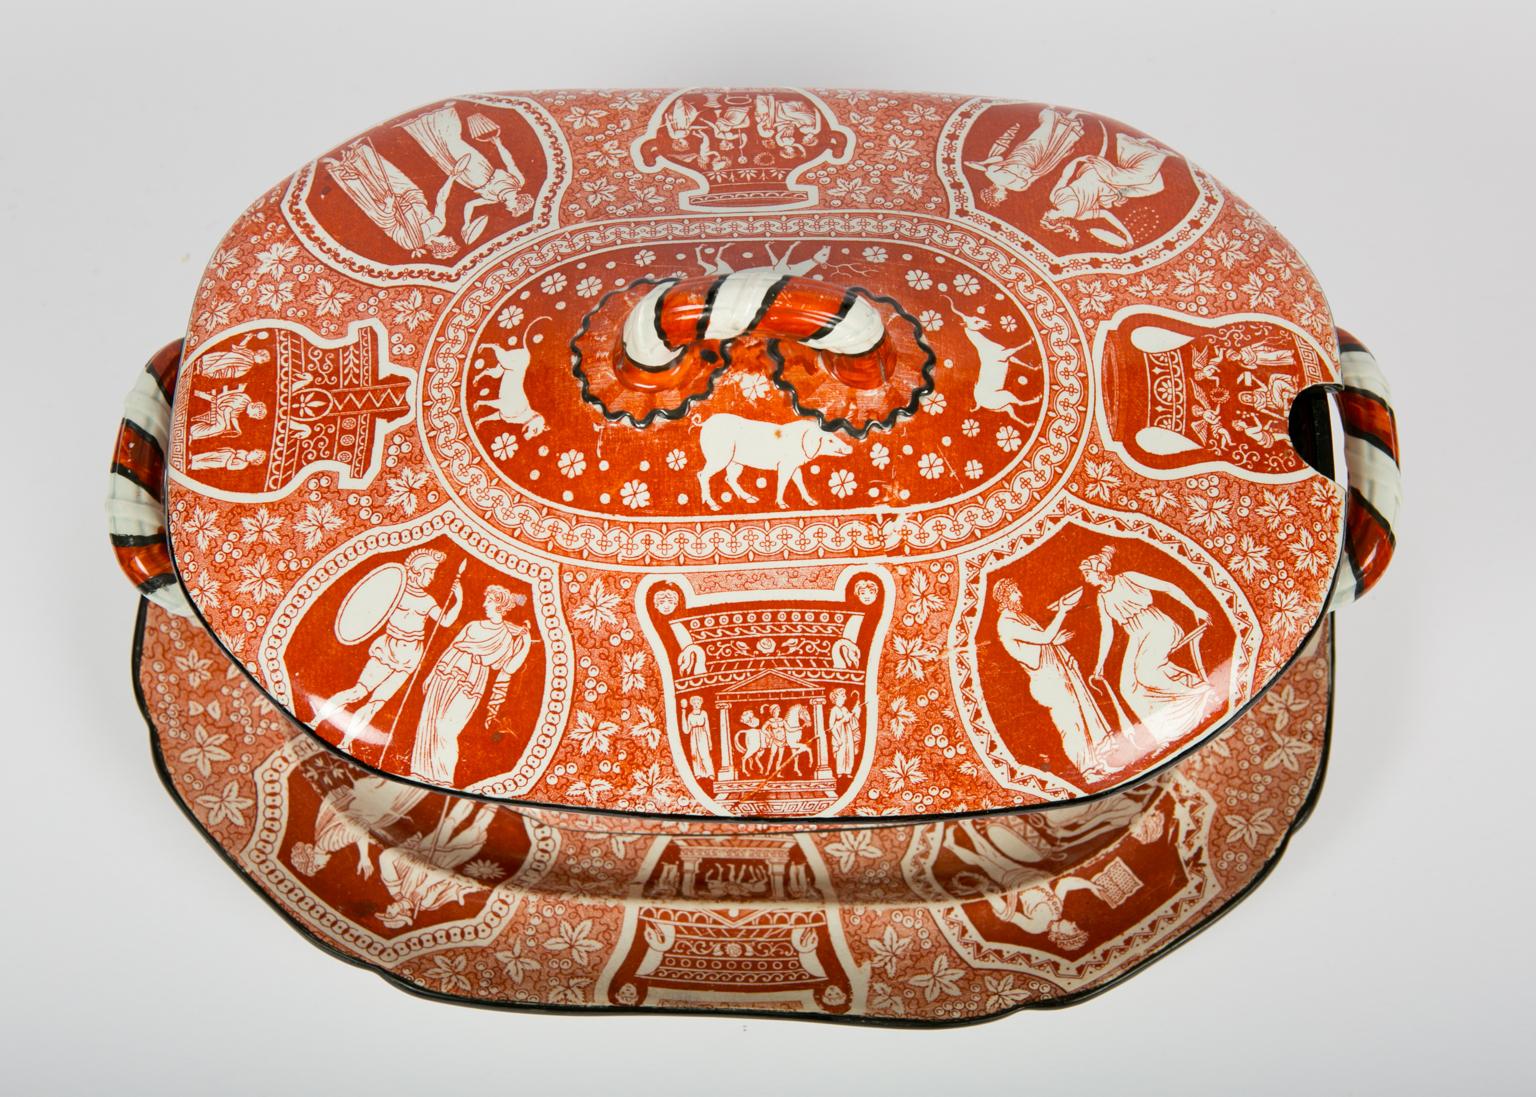 19th Century Antique Red Greek Ware Soup Tureen Decorated with Classical Figures circa 1810